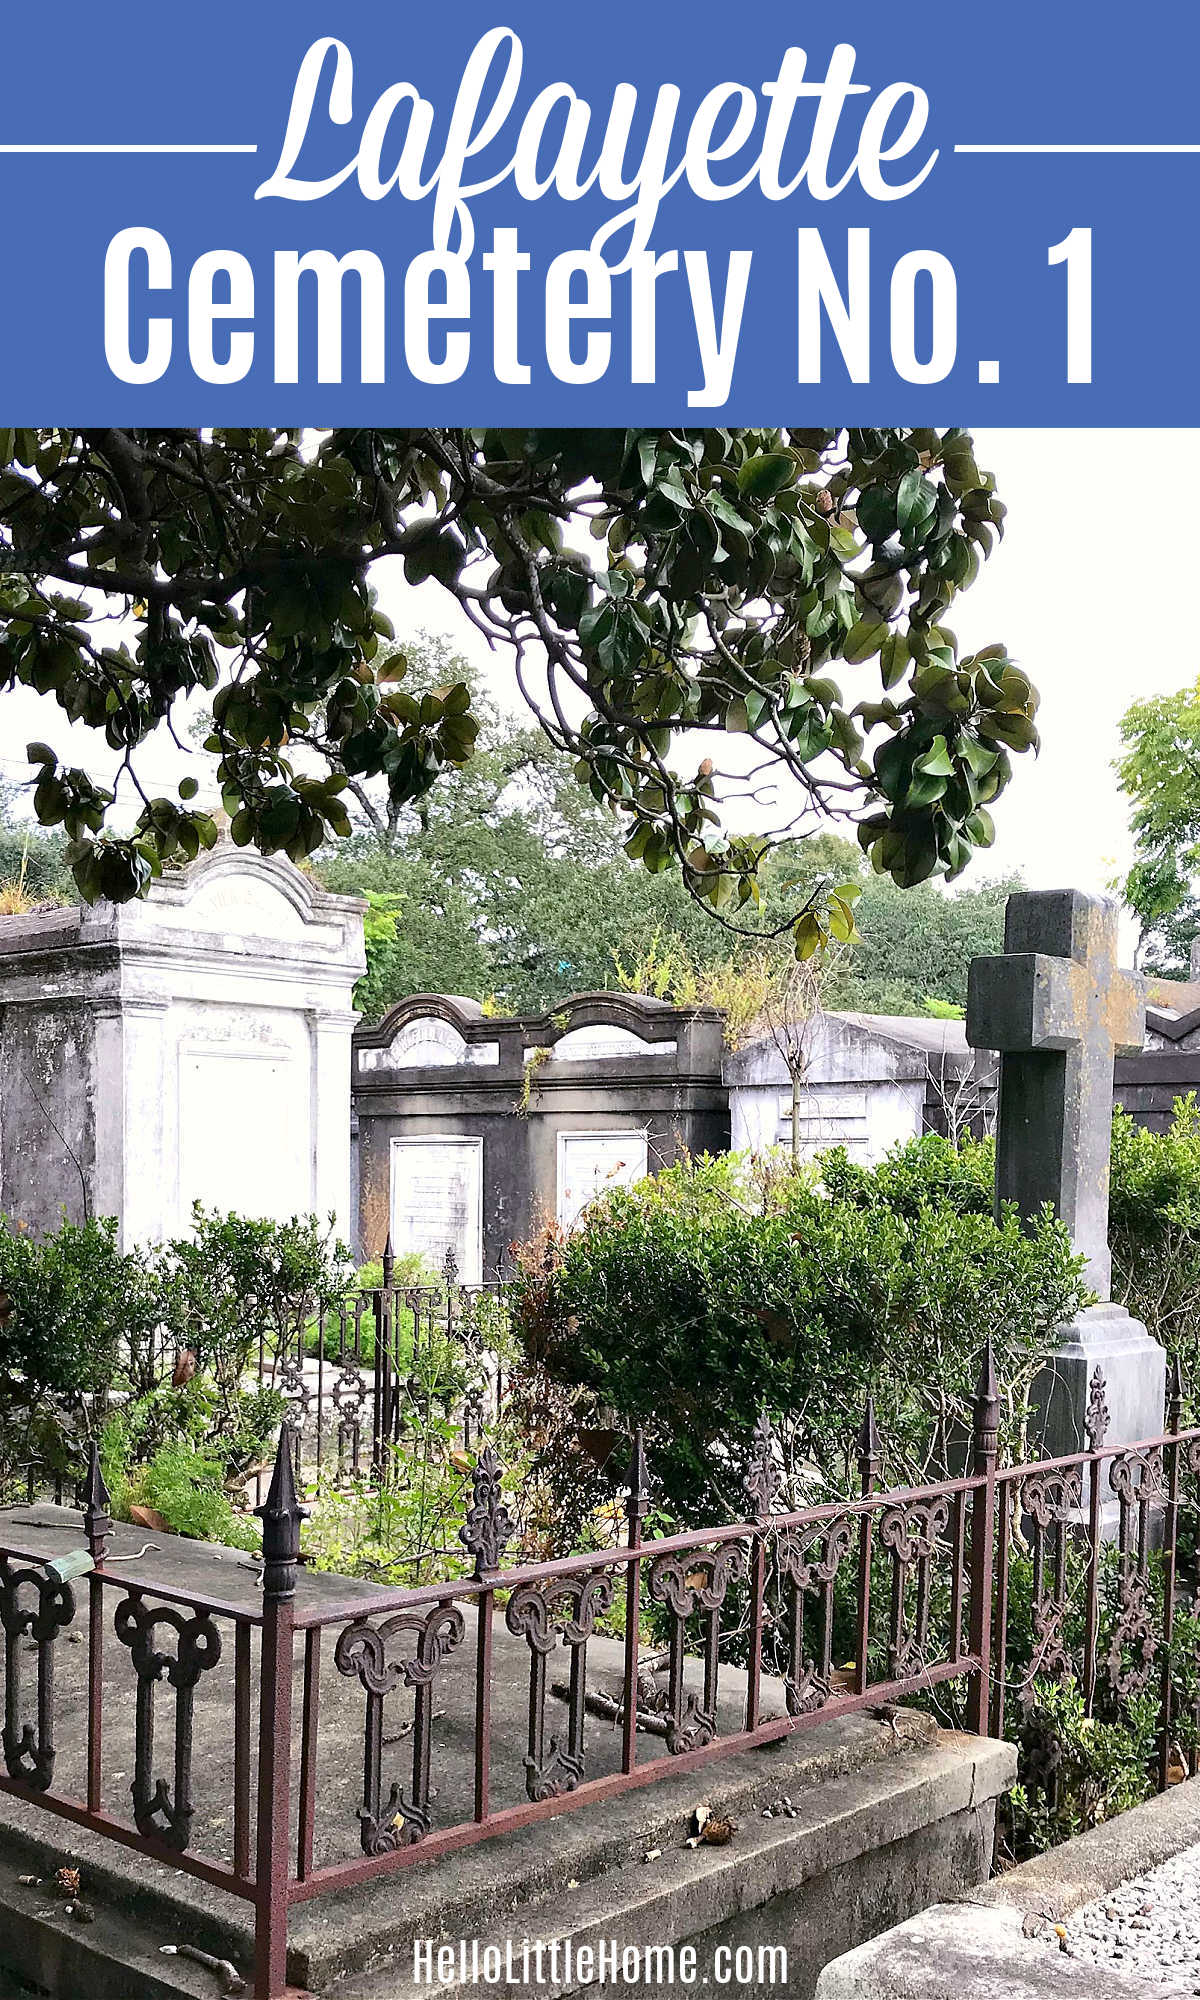 Lafayette Cemetery No. 1 in New Orleans